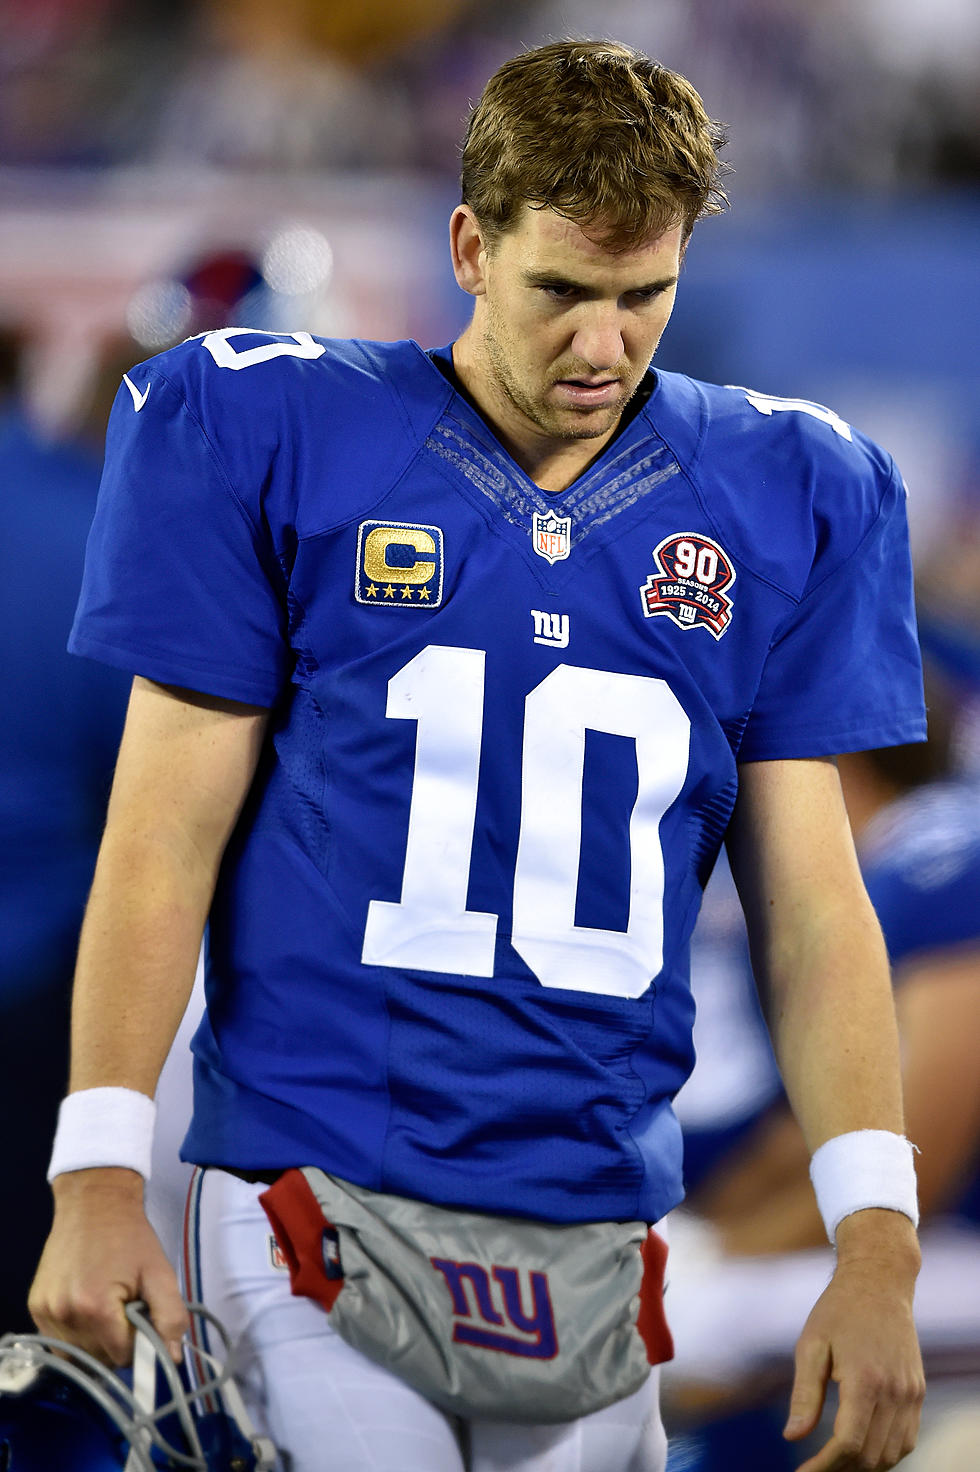 Giants Lose Third Straight Fall to Colts 40-24